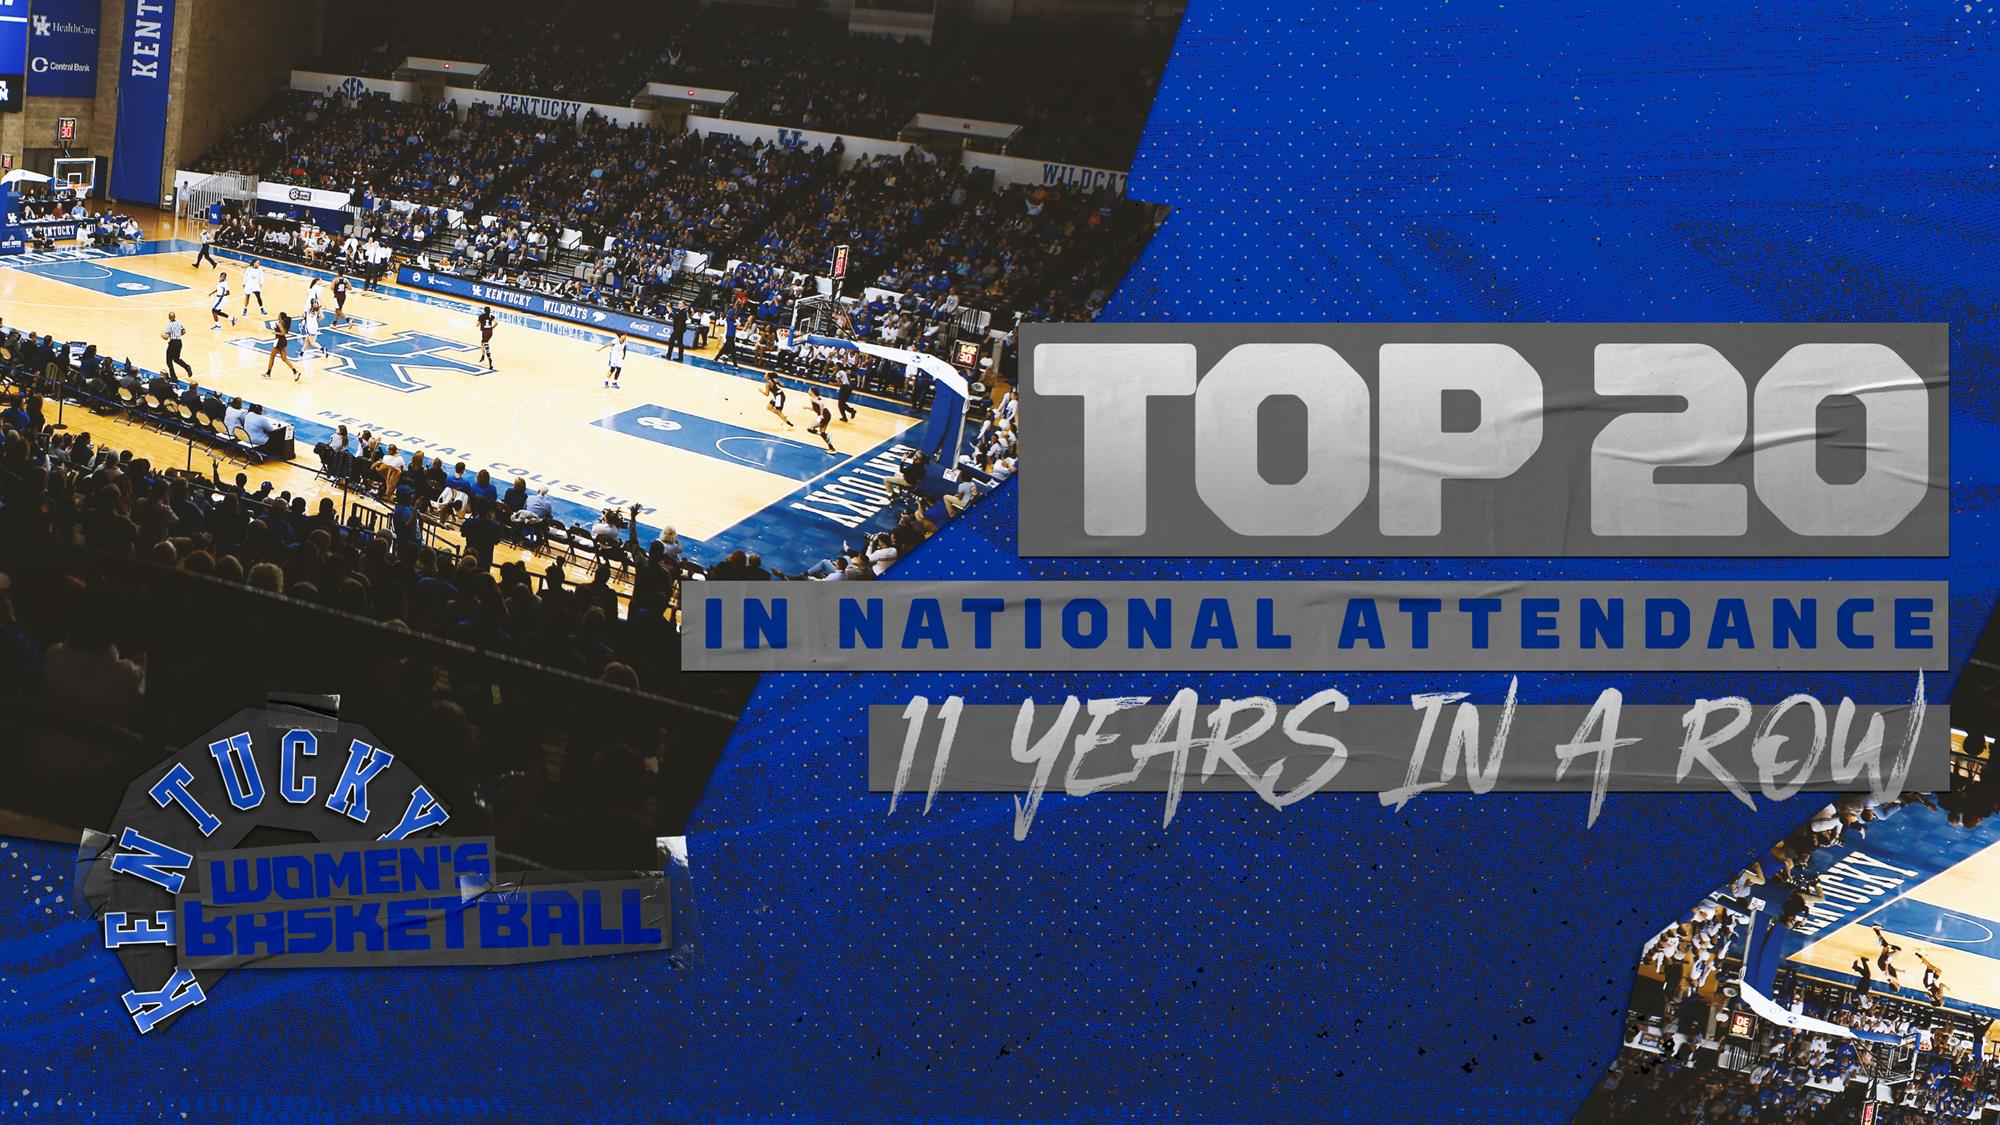 WBB Ranks Top 20 in National Attendance for 11th Straight Year